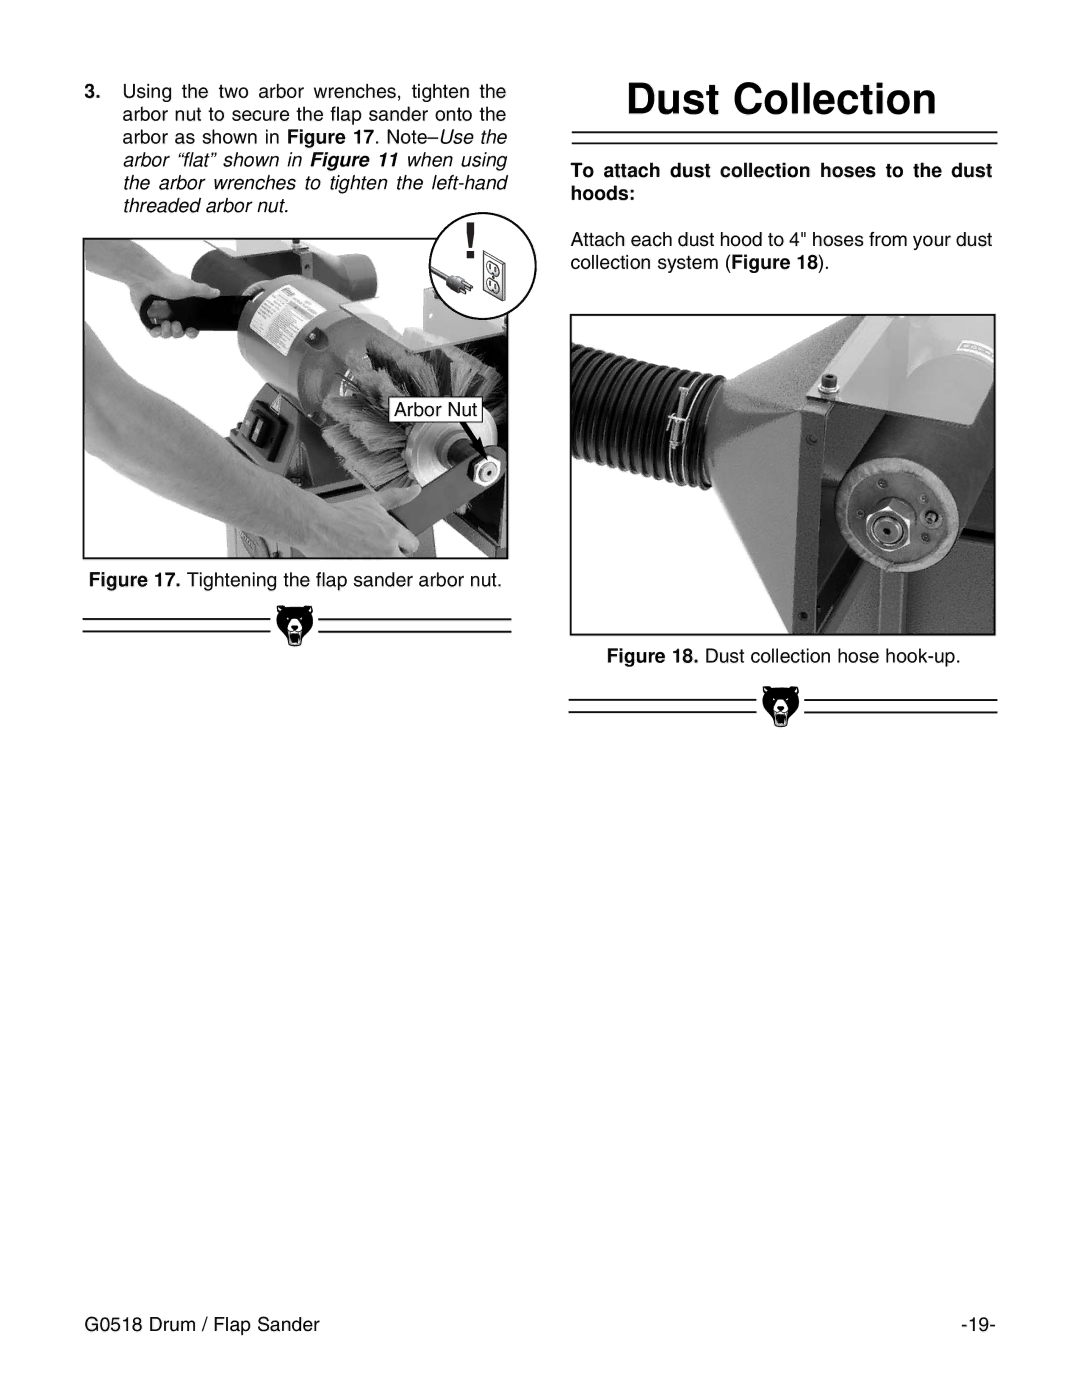 Grizzly G0518 instruction manual Dust Collection, To attach dust collection hoses to the dust hoods 